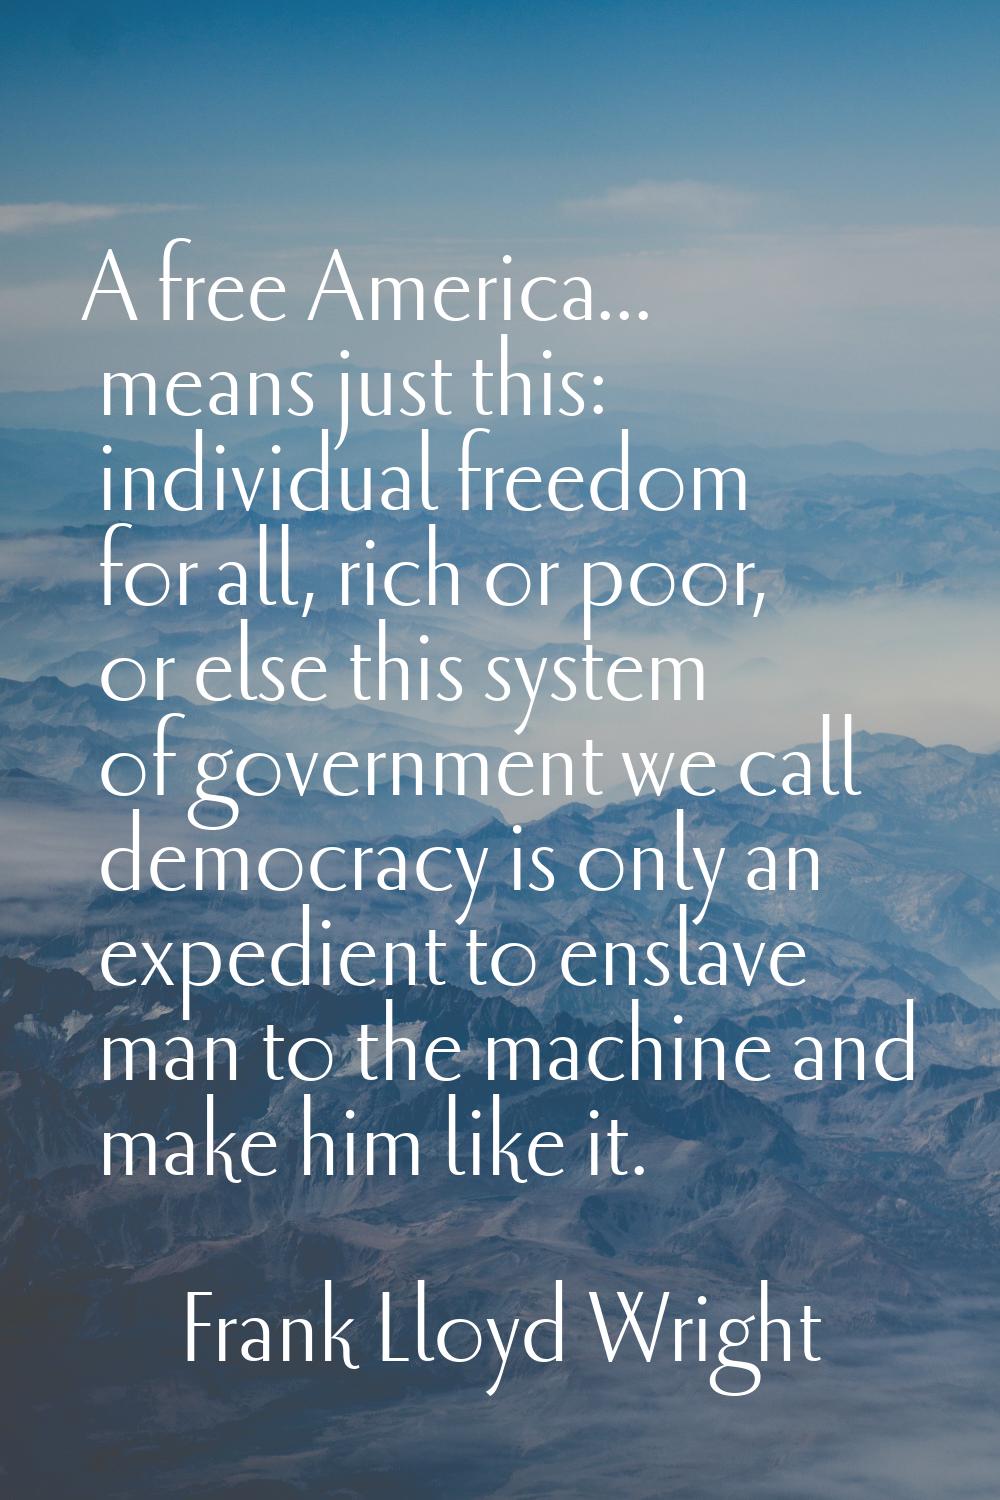 A free America... means just this: individual freedom for all, rich or poor, or else this system of